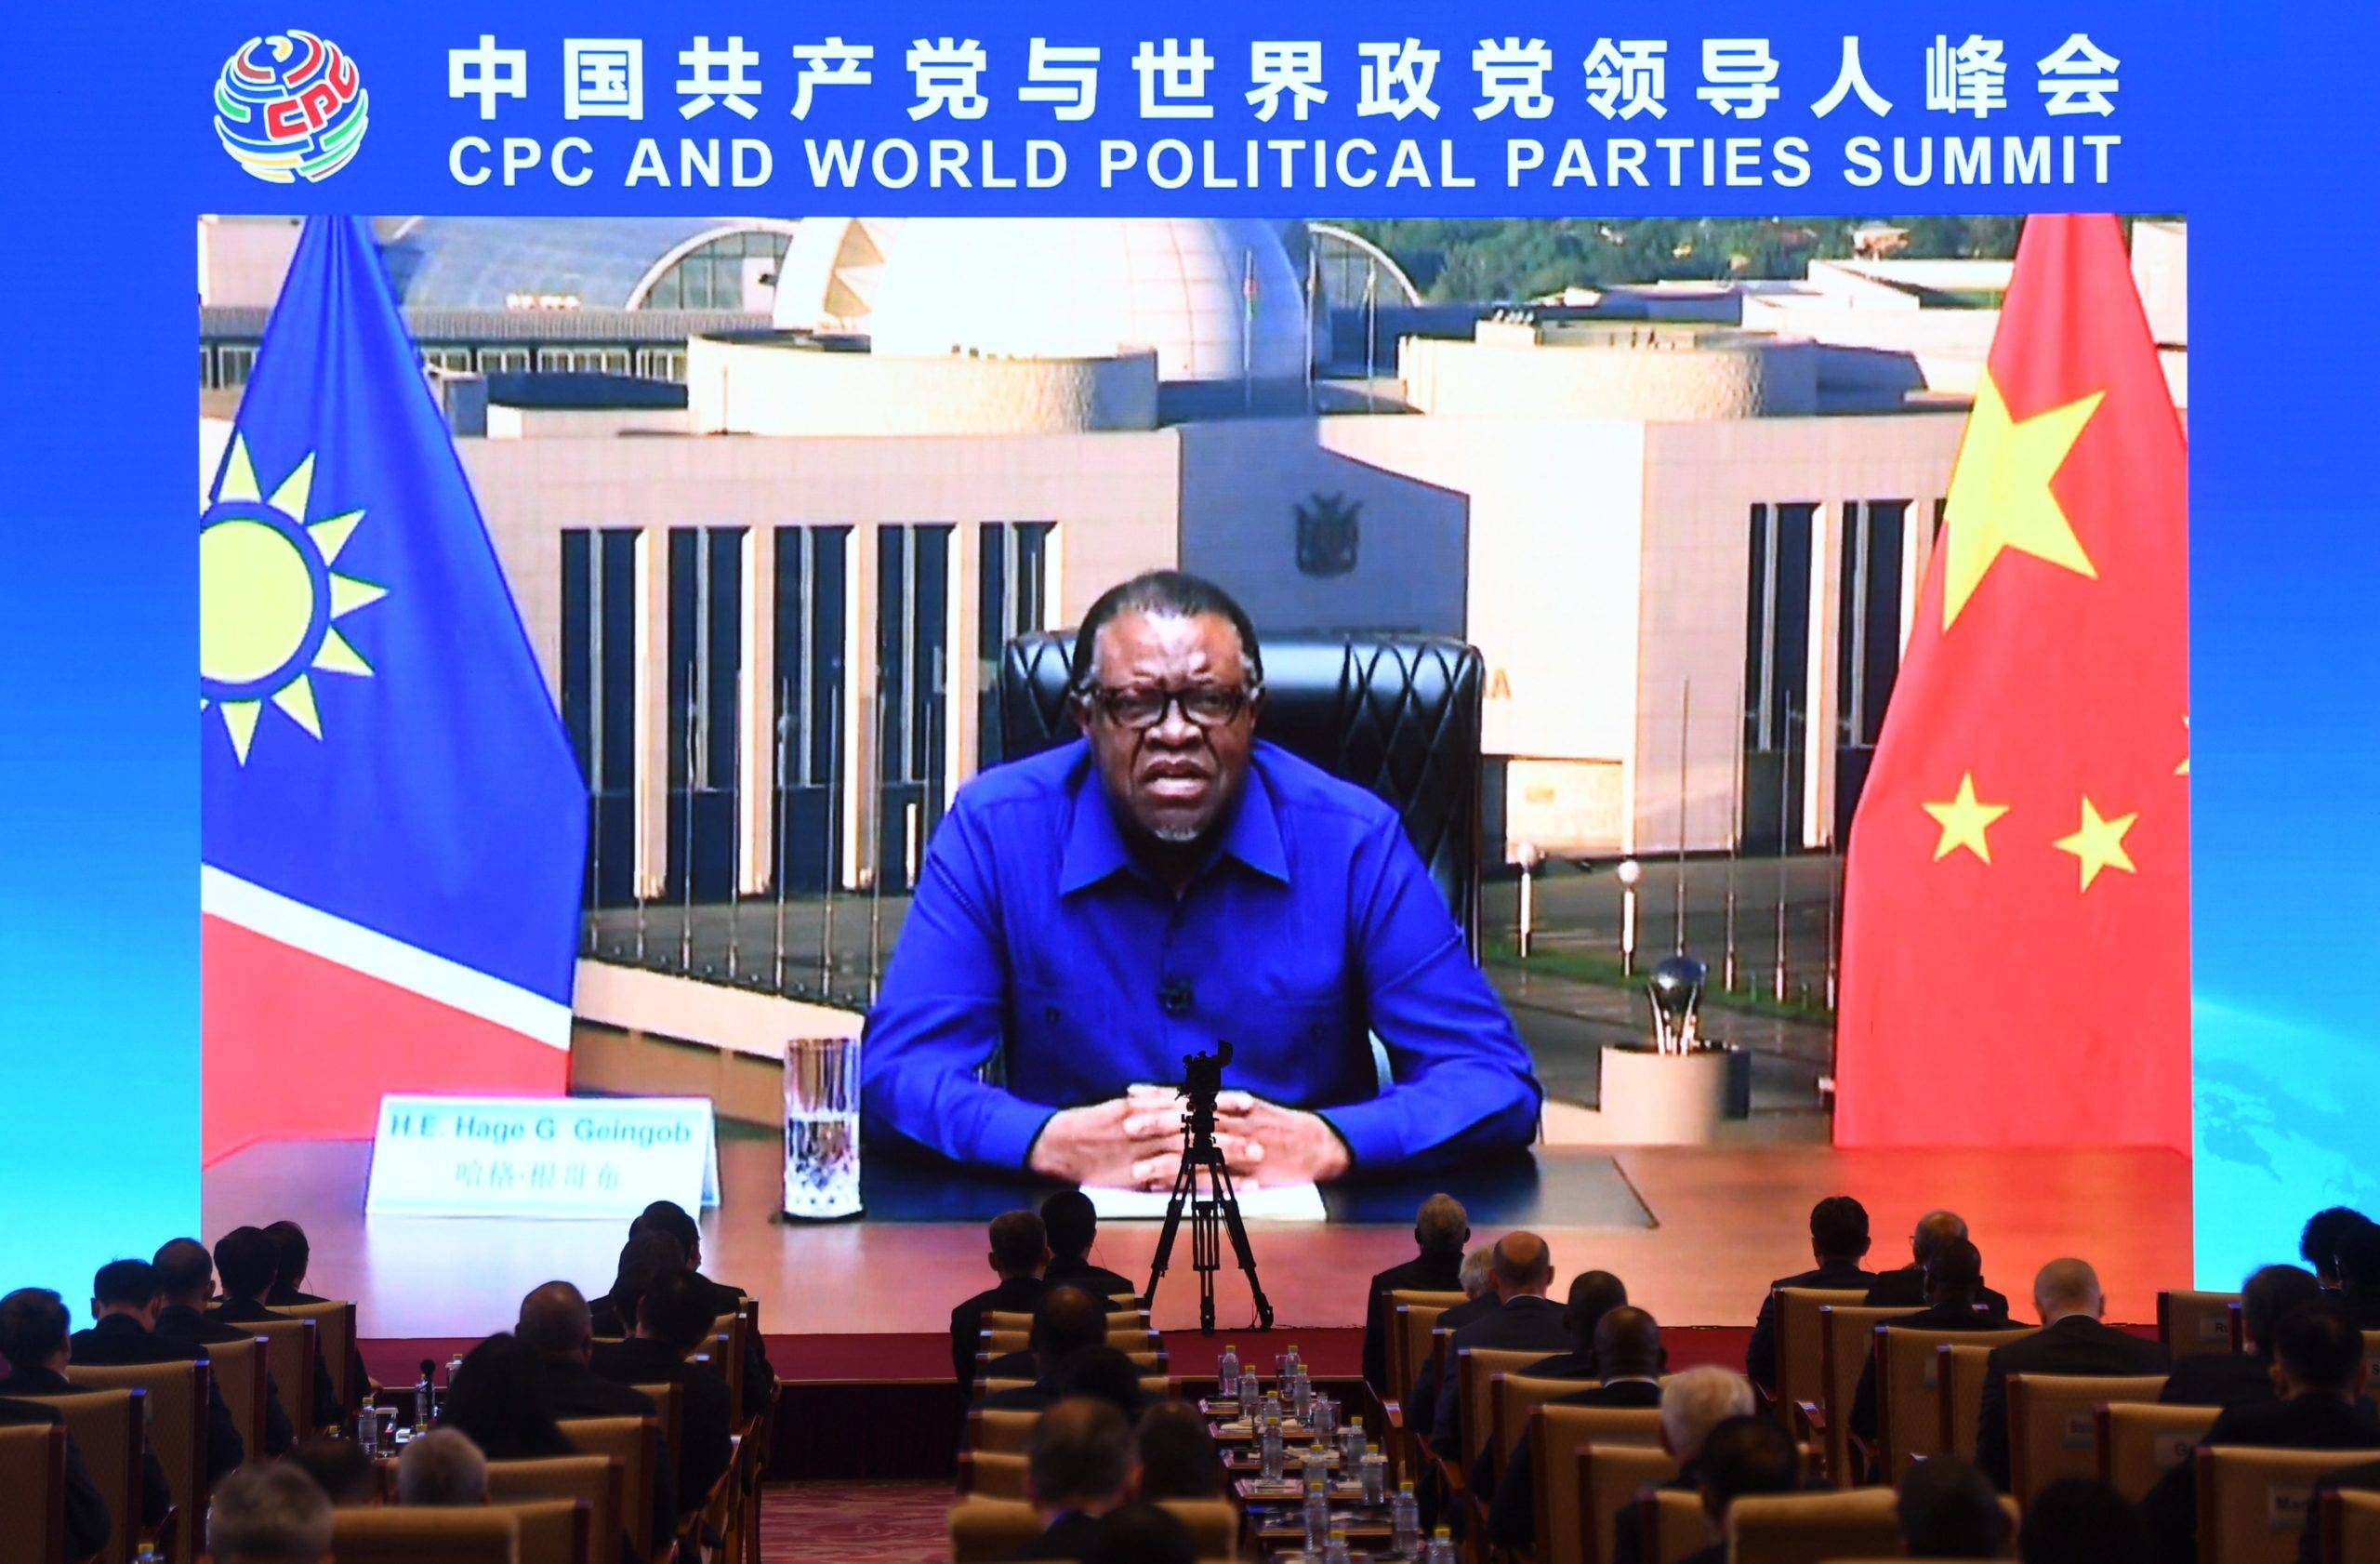 (210706) -- BEIJING, July 6, 2021 (Xinhua) -- Hage Geingob, leader of the South West Africa People's Organization and president of Namibia, addresses the Communist Party of China (CPC) and World Political Parties Summit on July 6, 2021. The CPC and World Political Parties Summit was held via video link on Tuesday. (Xinhua/Jin Liangkuai) - Jin Liangkuai -//CHINENOUVELLE_XxjpbeE007022_20210707_PEPFN0A001/2107070845 - Sipa (C)